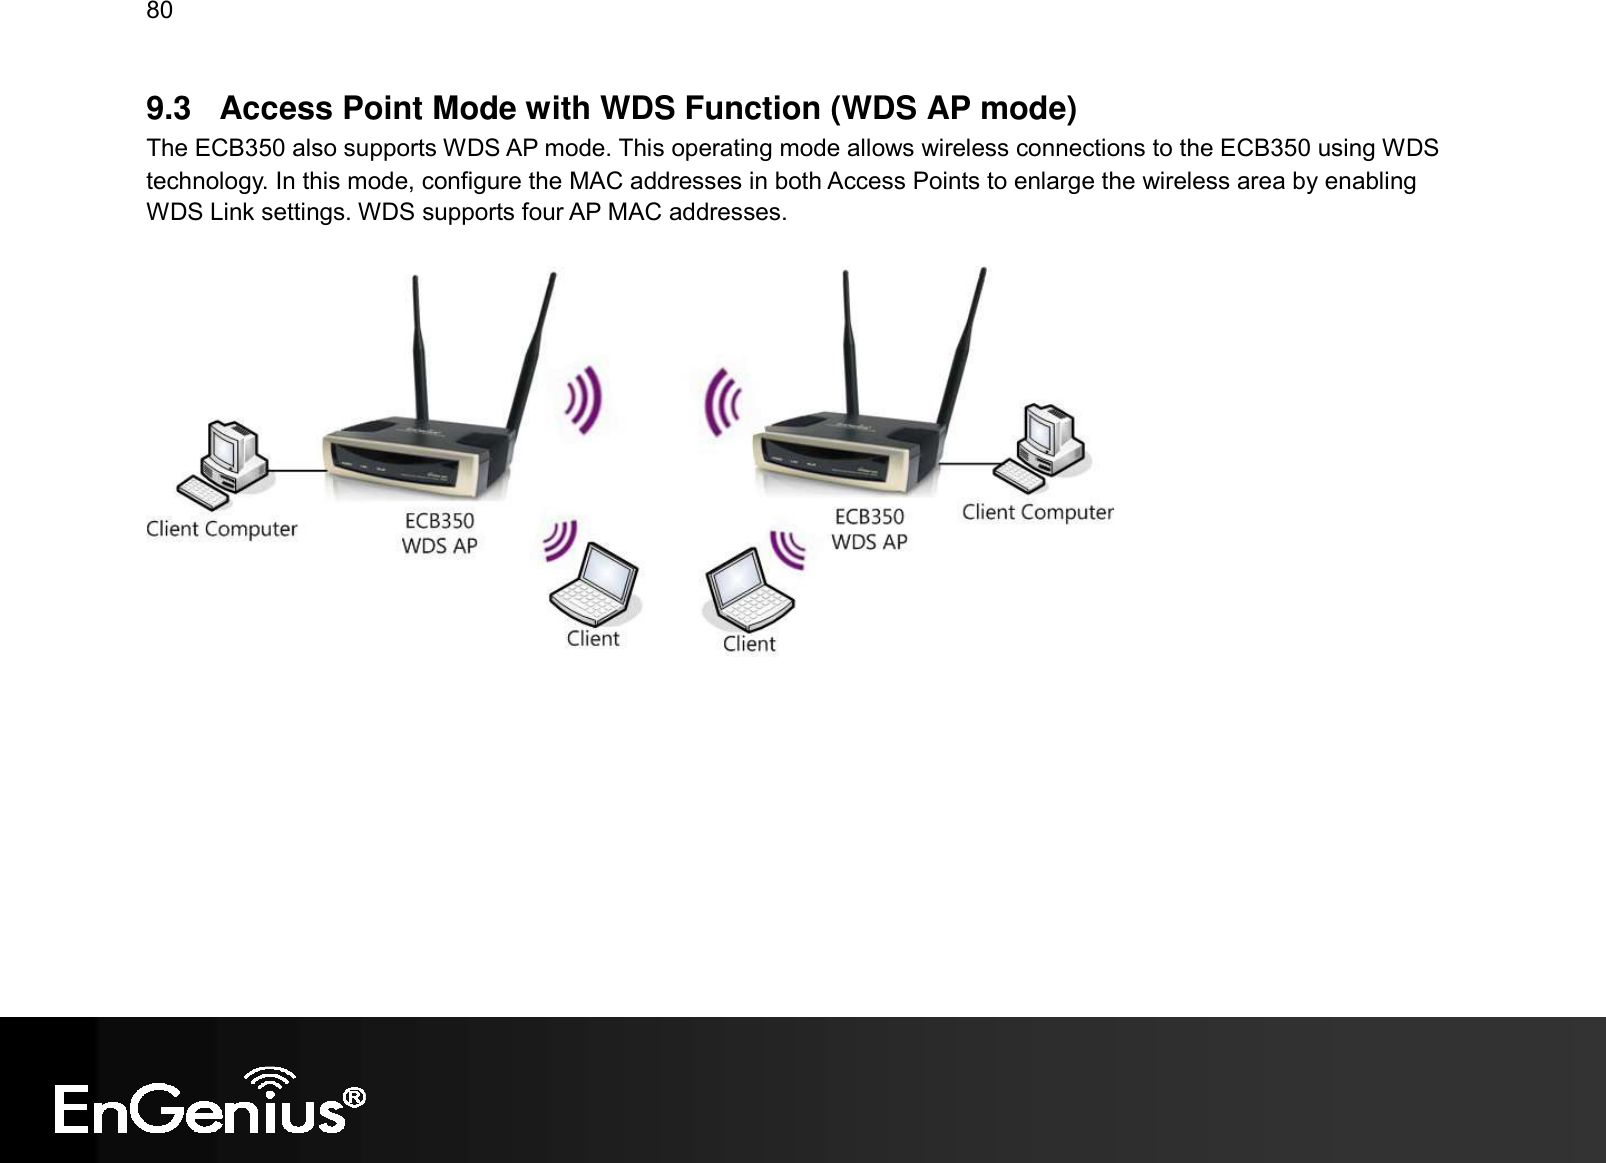 80  9.3  Access Point Mode with WDS Function (WDS AP mode) The ECB350 also supports WDS AP mode. This operating mode allows wireless connections to the ECB350 using WDS technology. In this mode, configure the MAC addresses in both Access Points to enlarge the wireless area by enabling WDS Link settings. WDS supports four AP MAC addresses.    